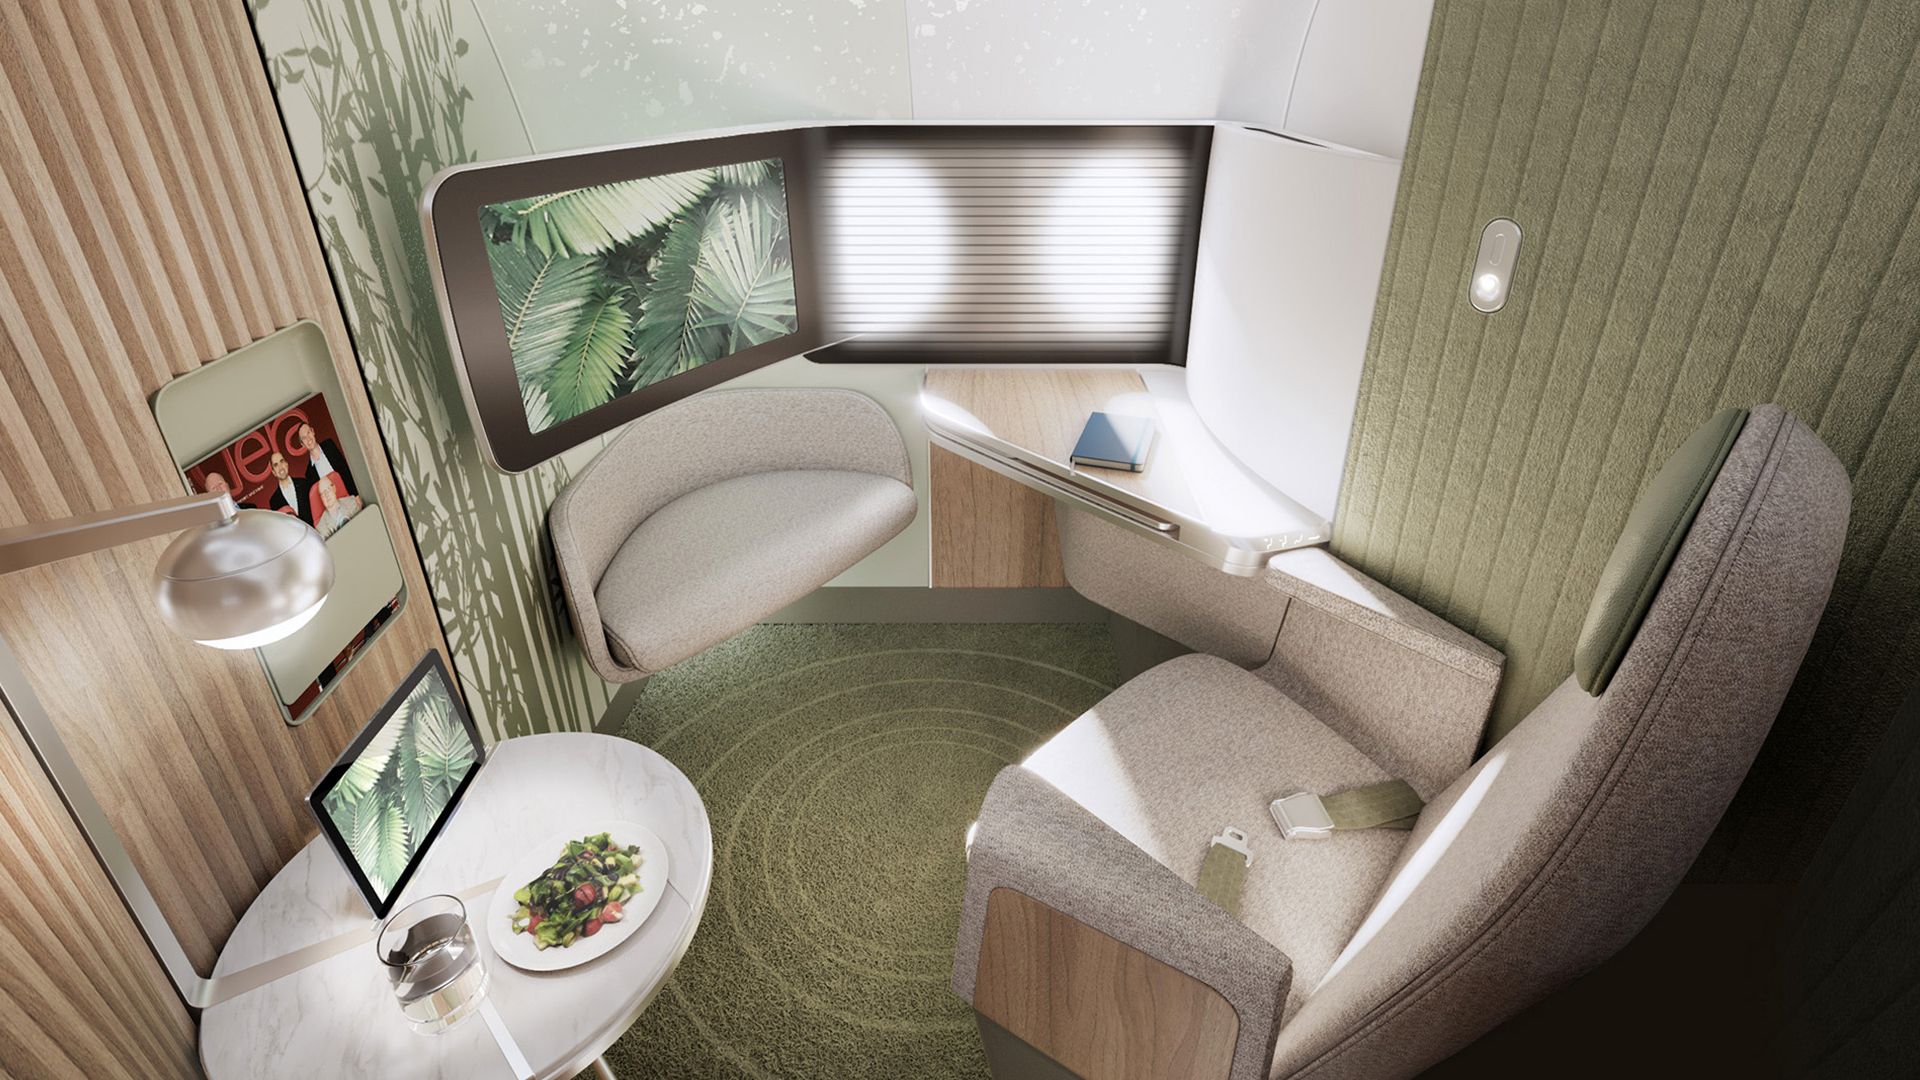 Image of a novel design for a first-class airline passenger suite